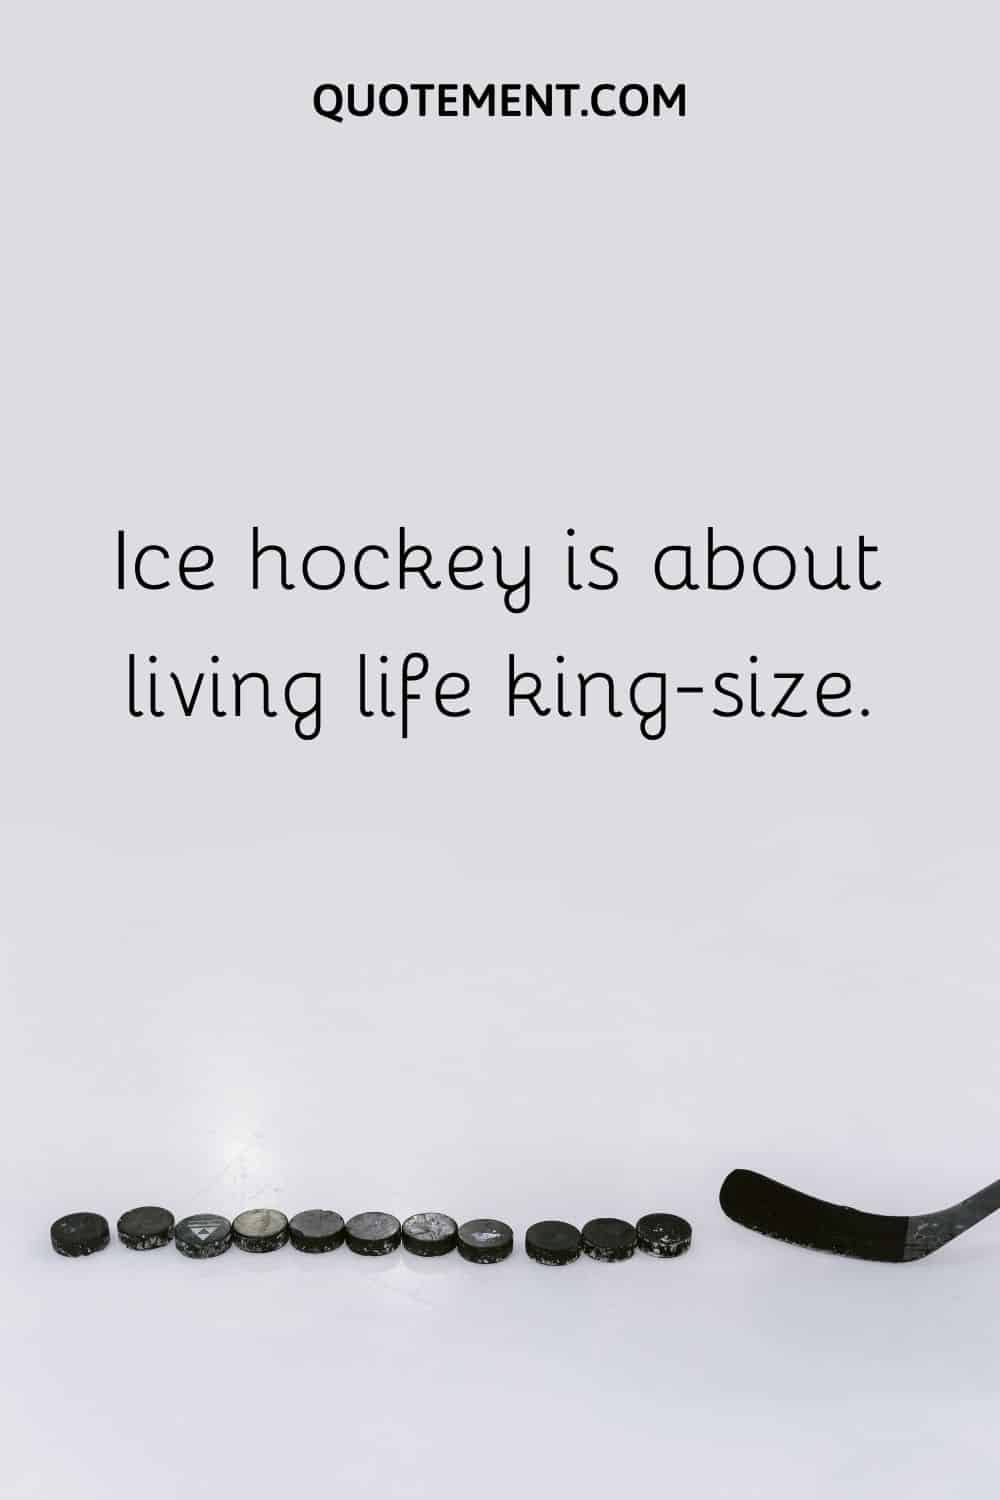 Ice hockey is about living life king-size.